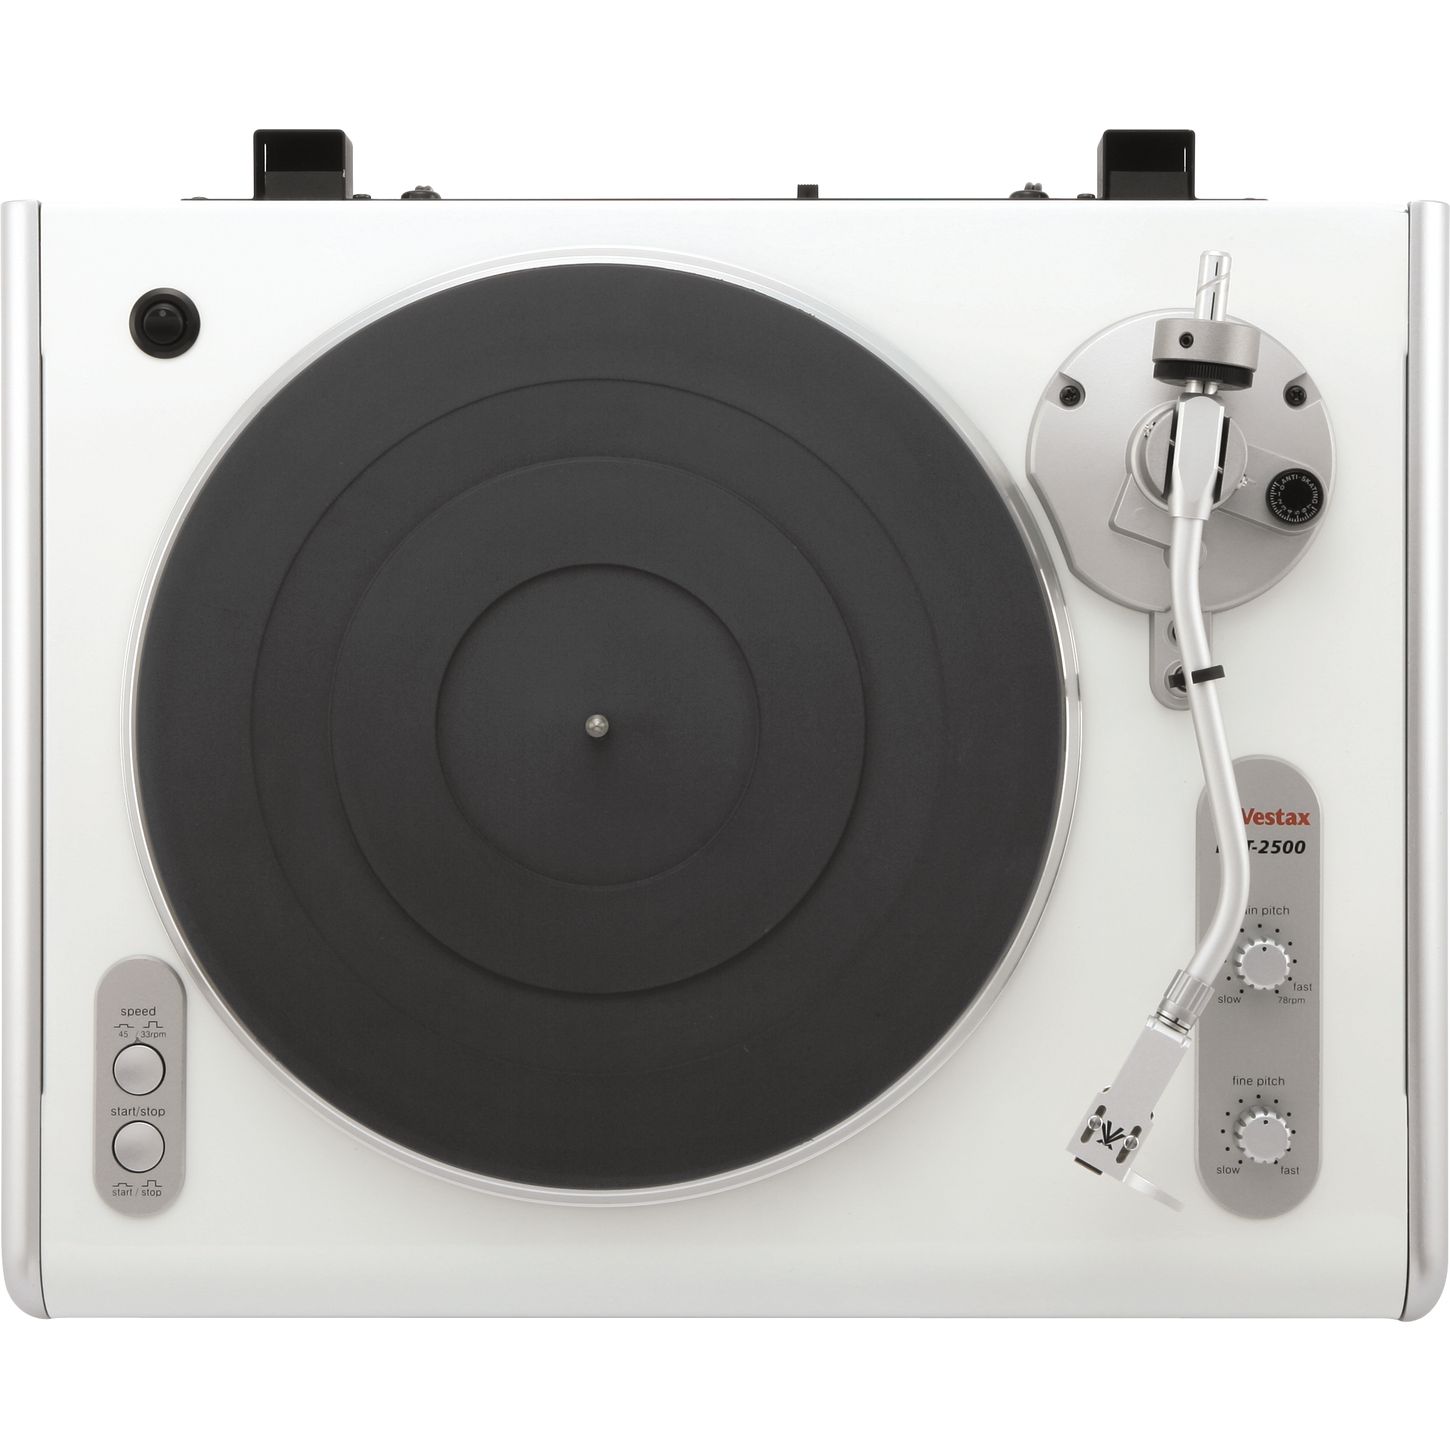 turntable top